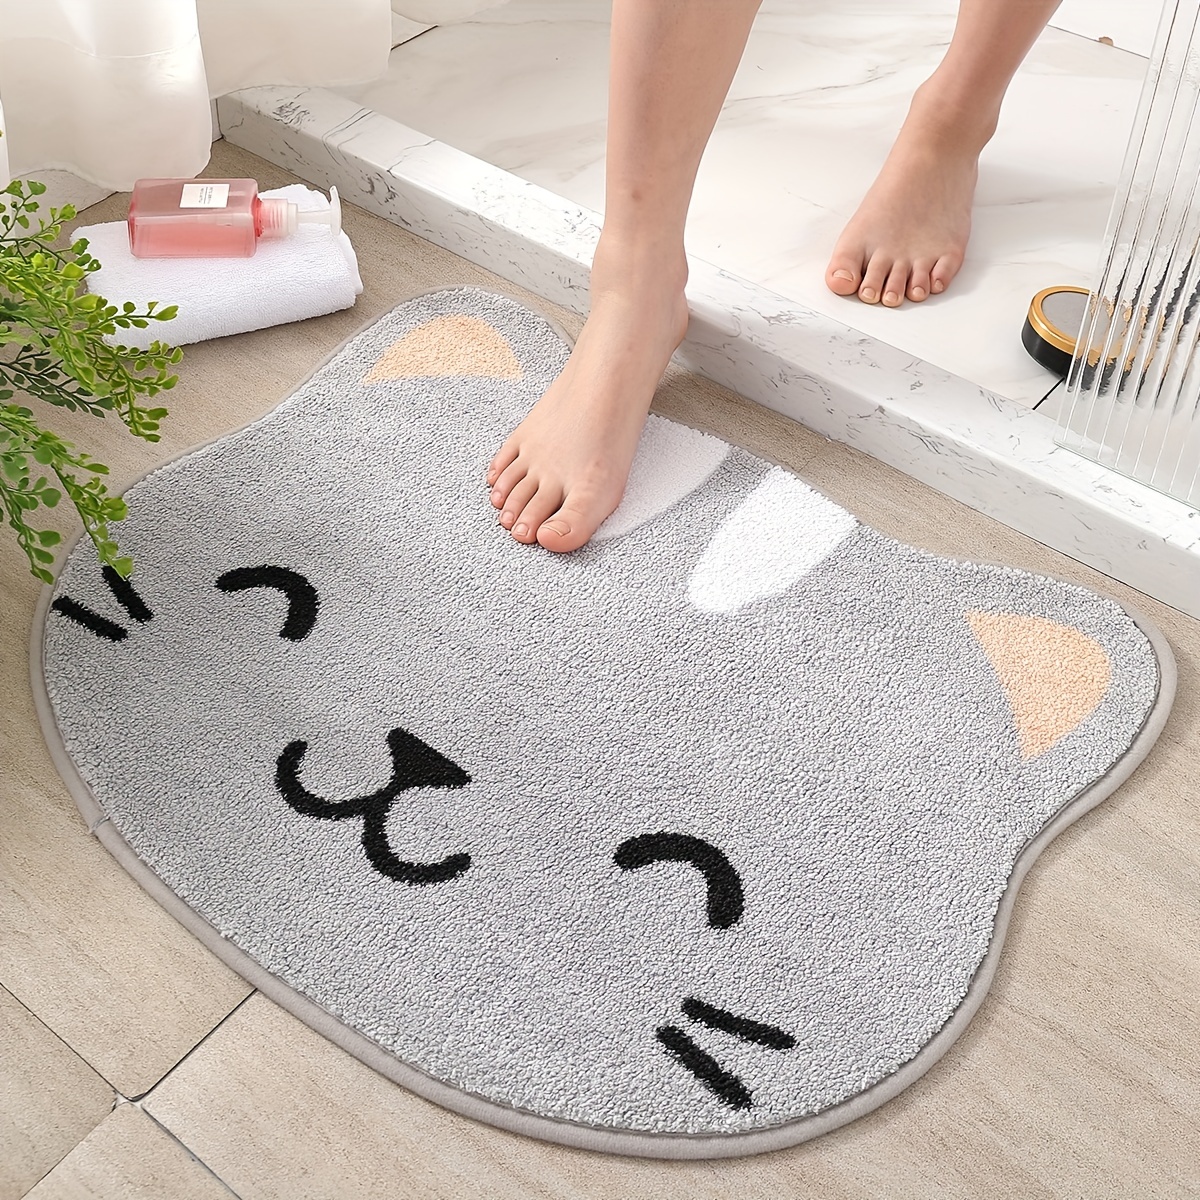 23.6in Smiley Face Rug Sunflower Cute Bath Mat Strong Water Absorption  Super Absorbent And Fluffy Machine Washable Bahtub Mats For Shower, Tub,  Bedroo